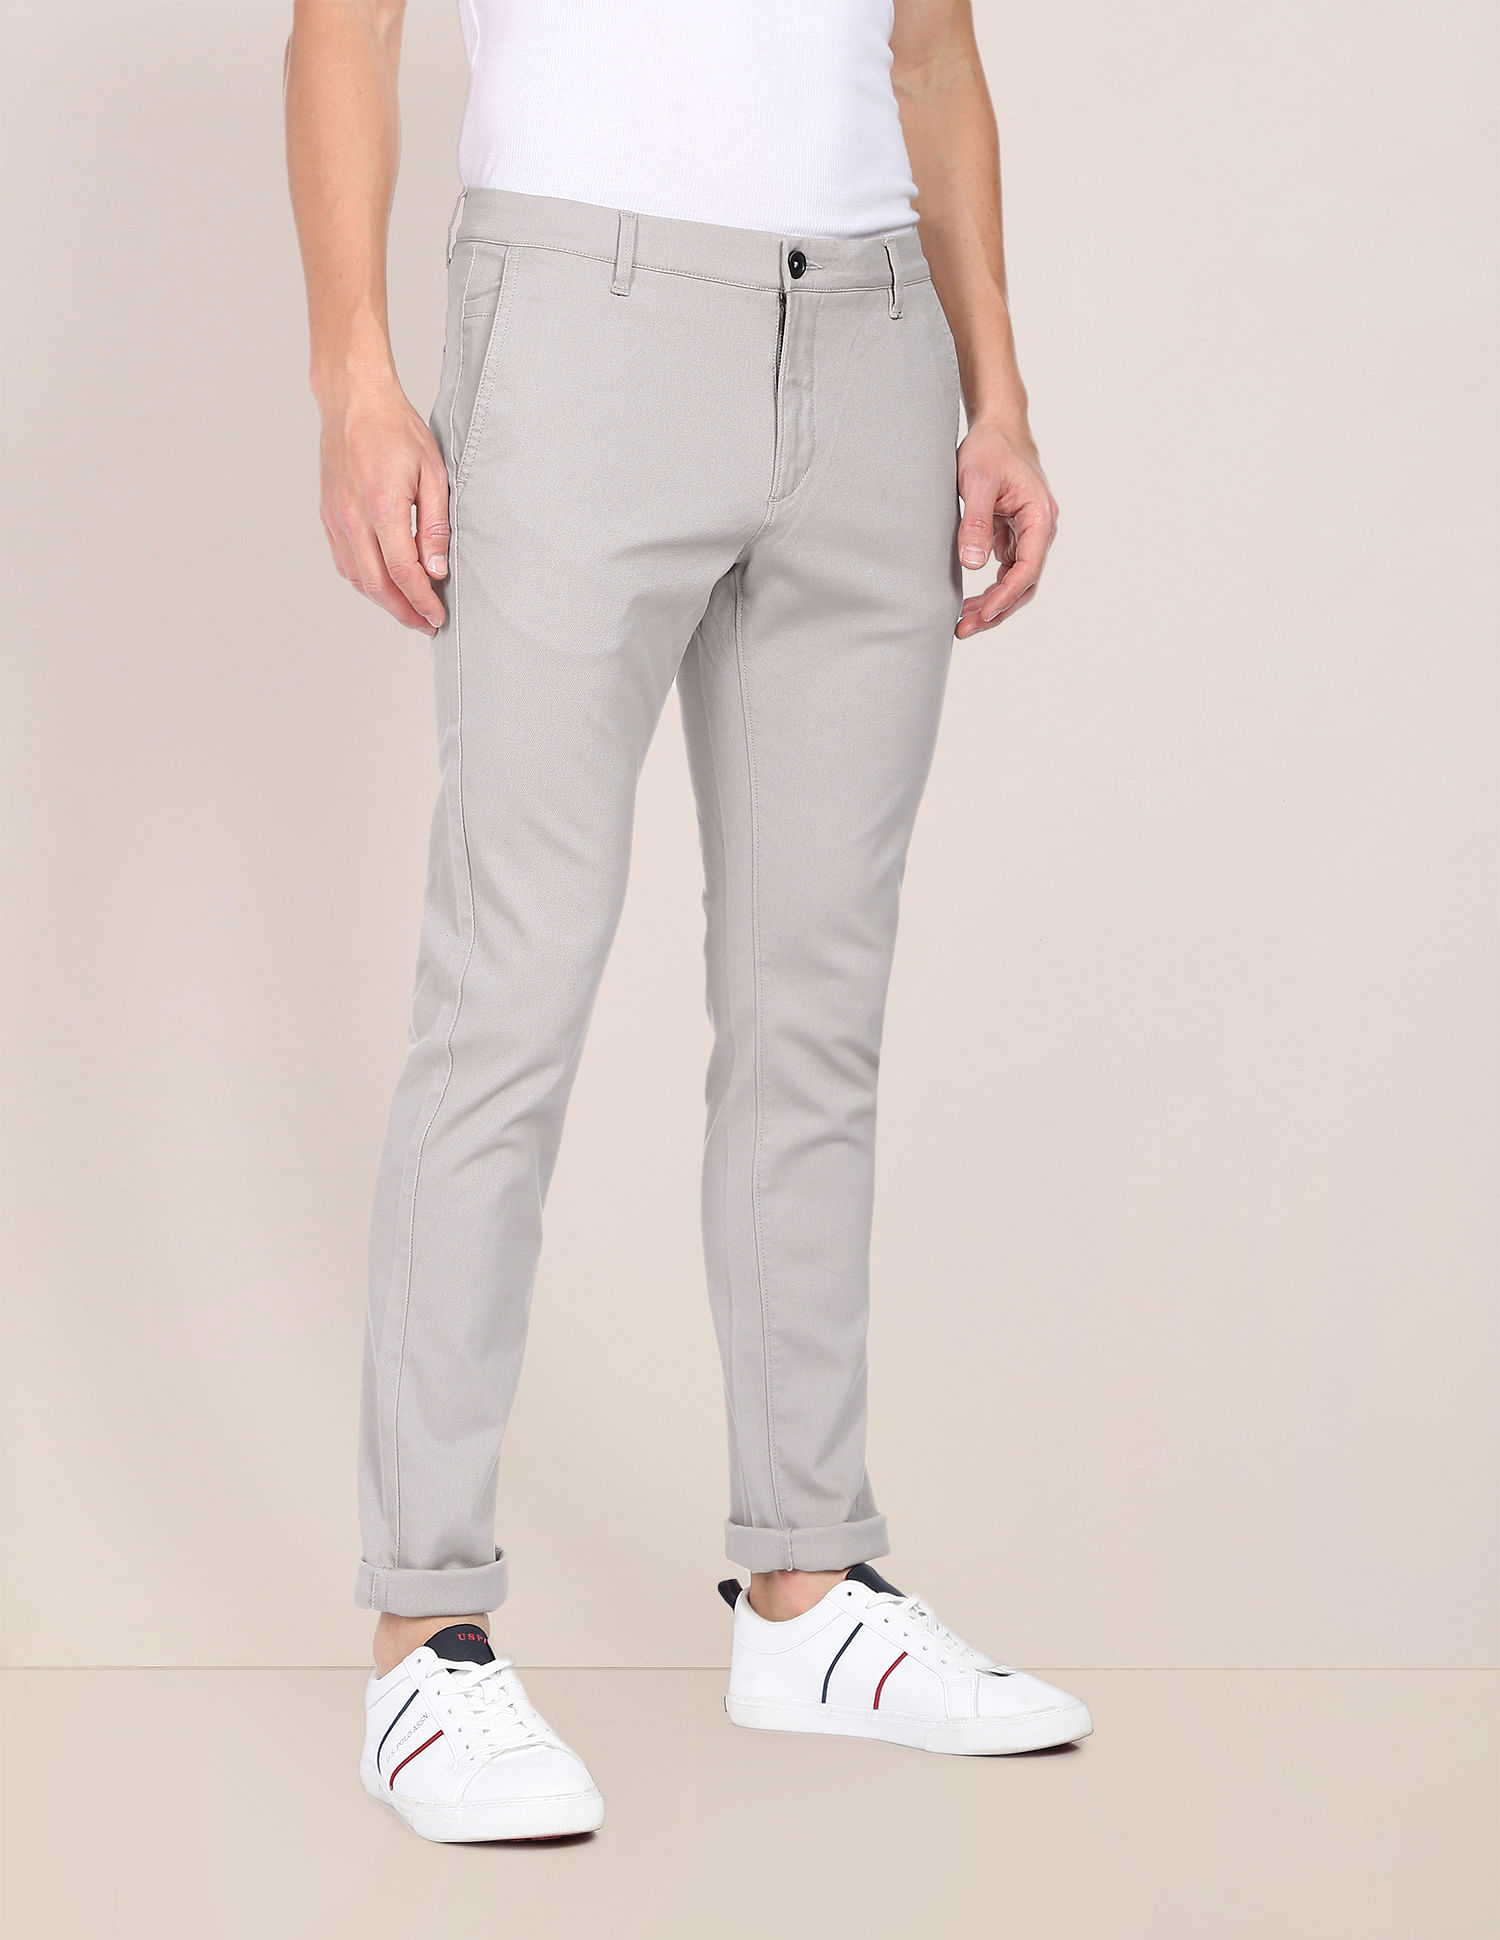 Buy latest Boyss Jeans  Trousers from US Polo Assn online in India   Top Collection at LooksGudin  Looksgudin